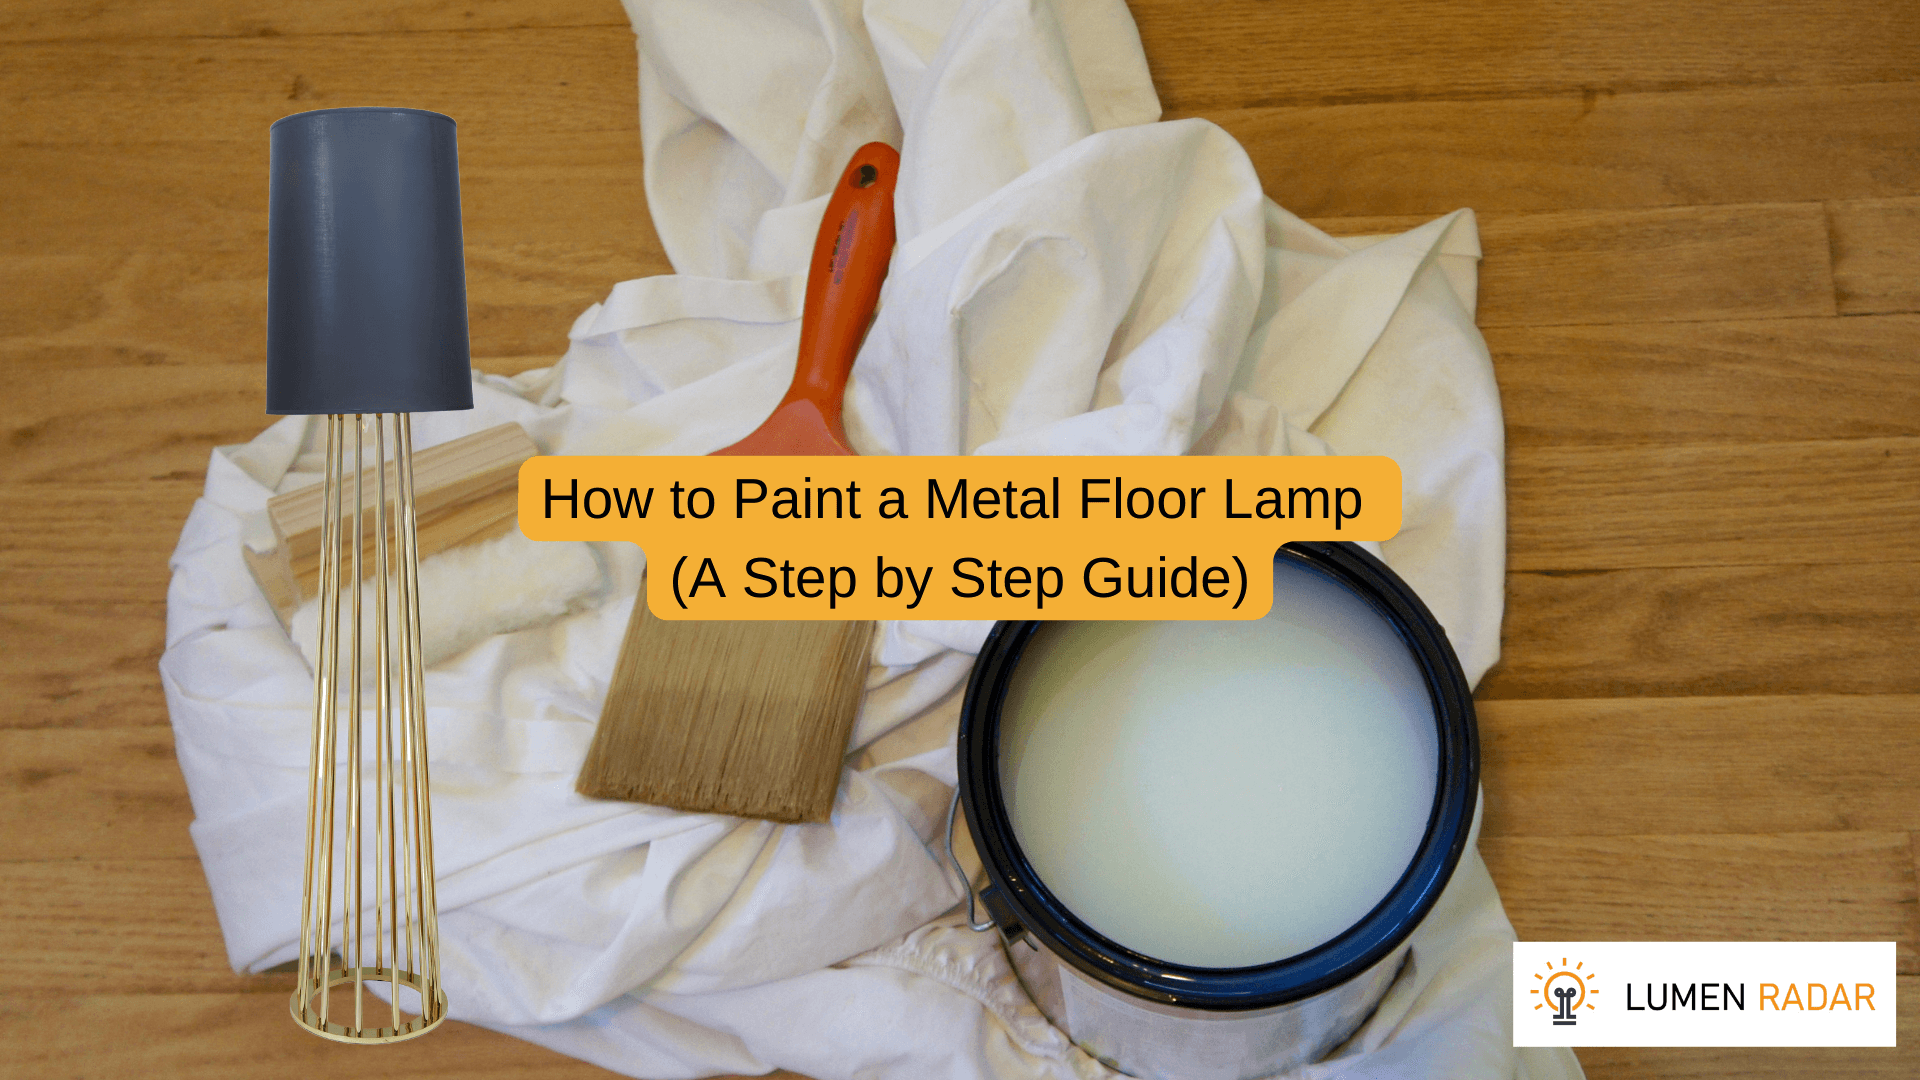 How to Paint a Metal Floor Lamp